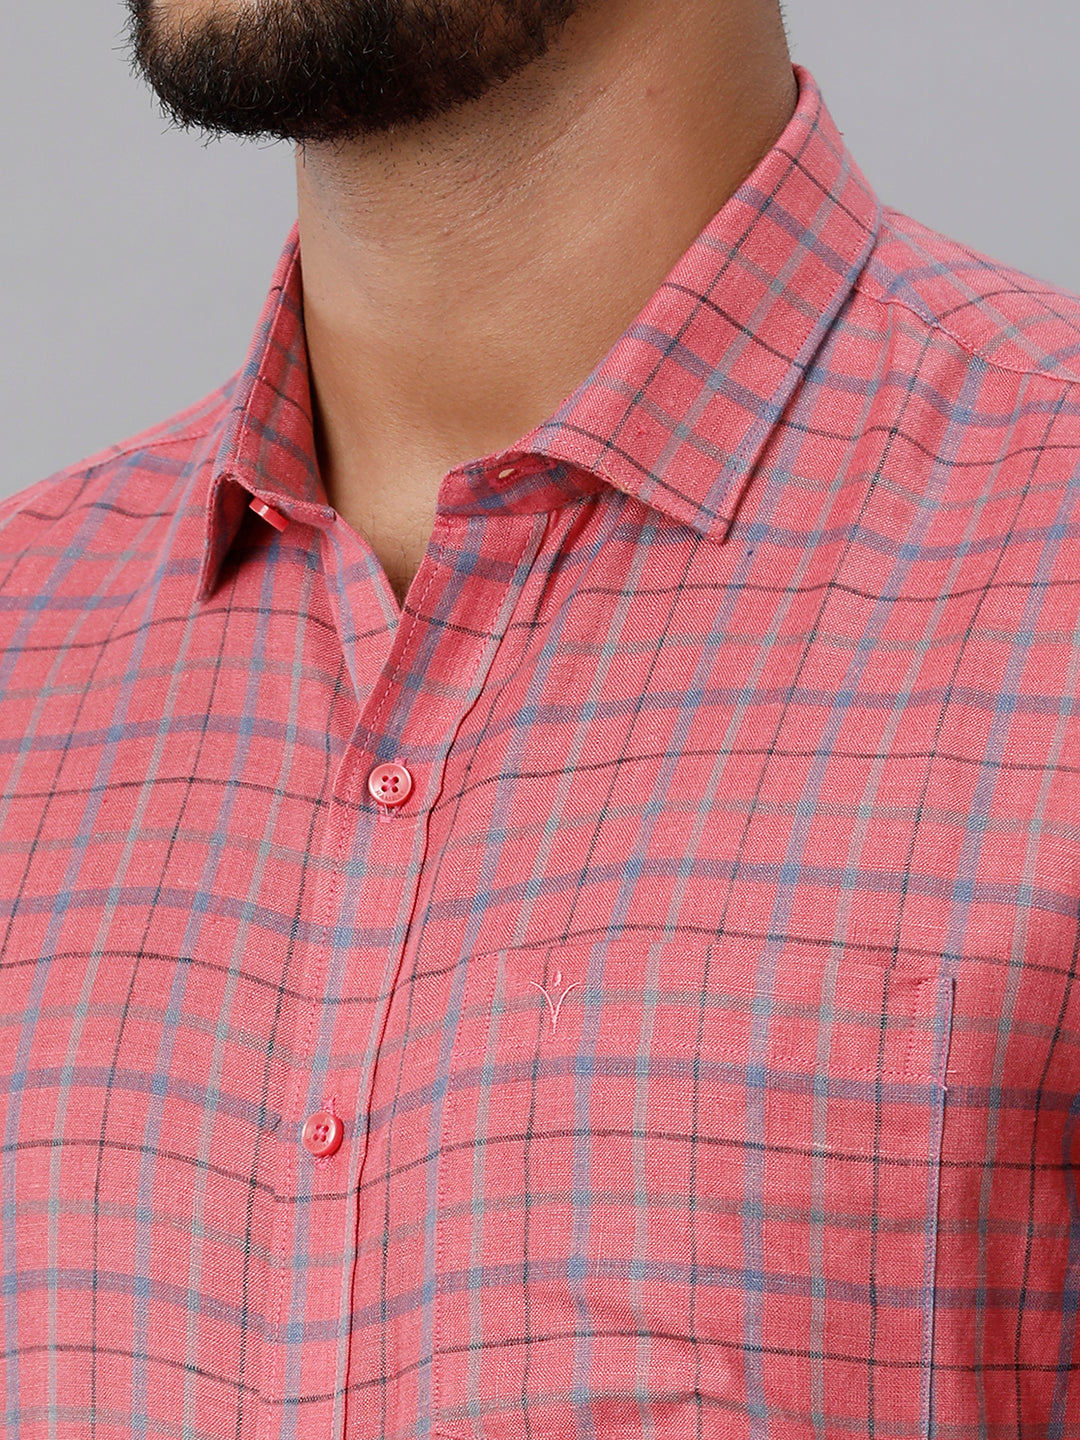 Mens Pure Linen Checked Full Sleeves Dark Pink Shirt LS7-Zoom view